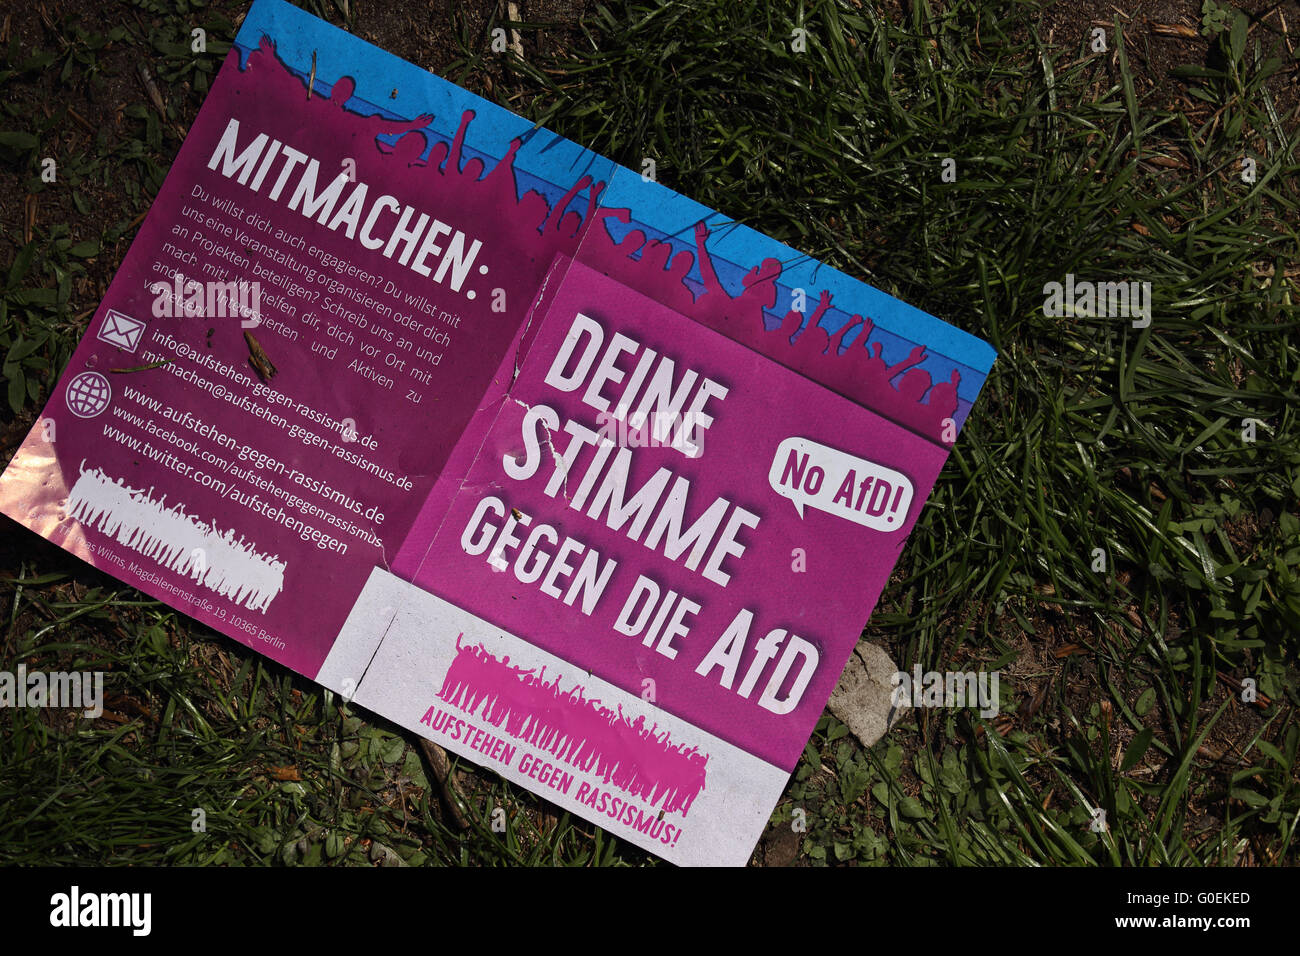 Leaflet in German against the AfD party lying on the grass. Stock Photo